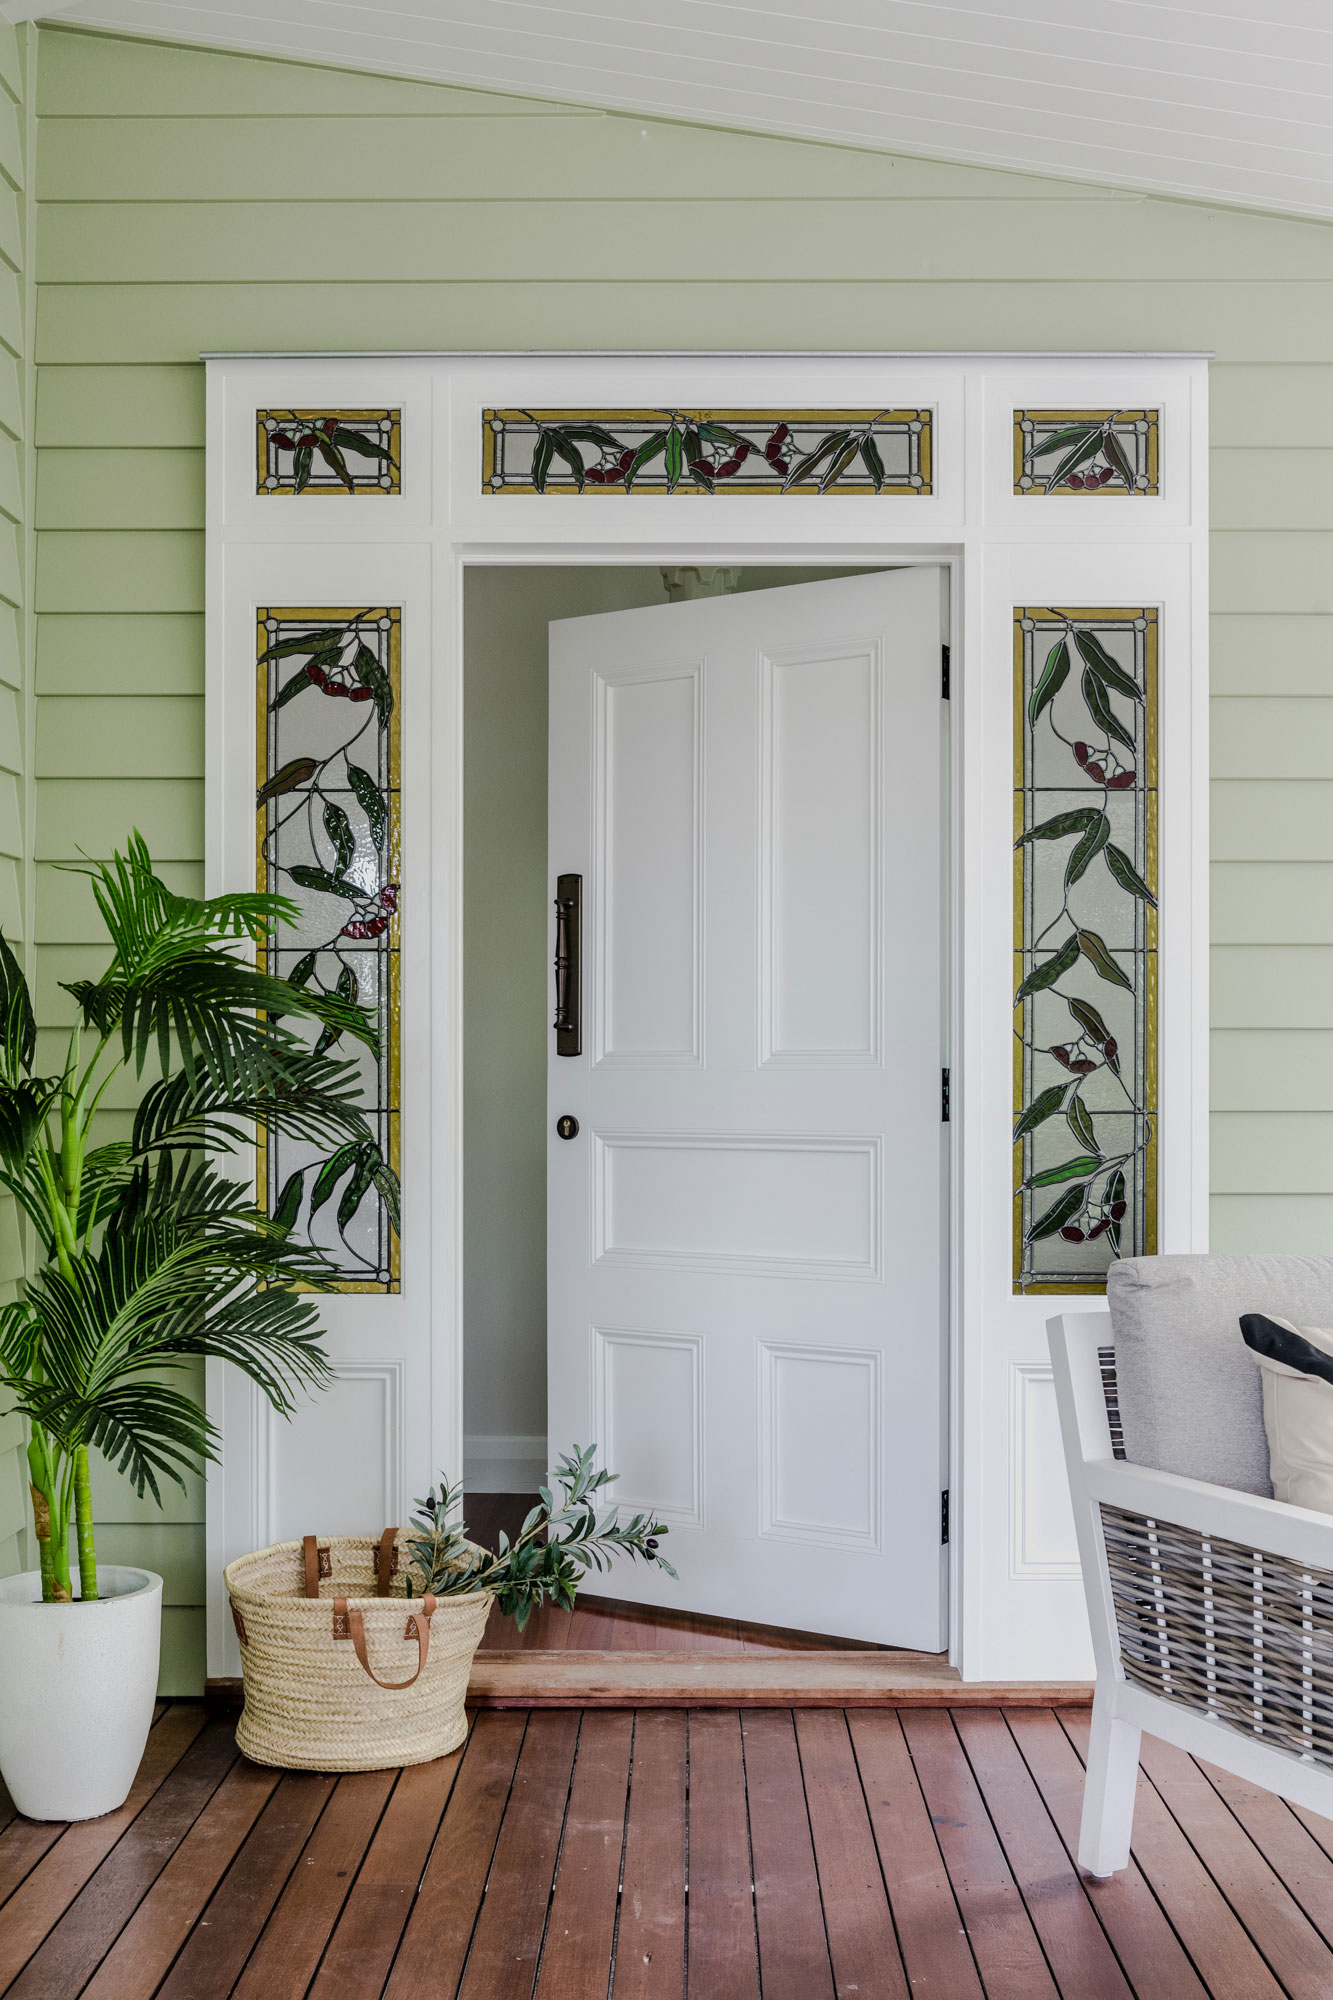 An white front door open to the interior of a home. Surrounding the door are potted plants and green cladding.